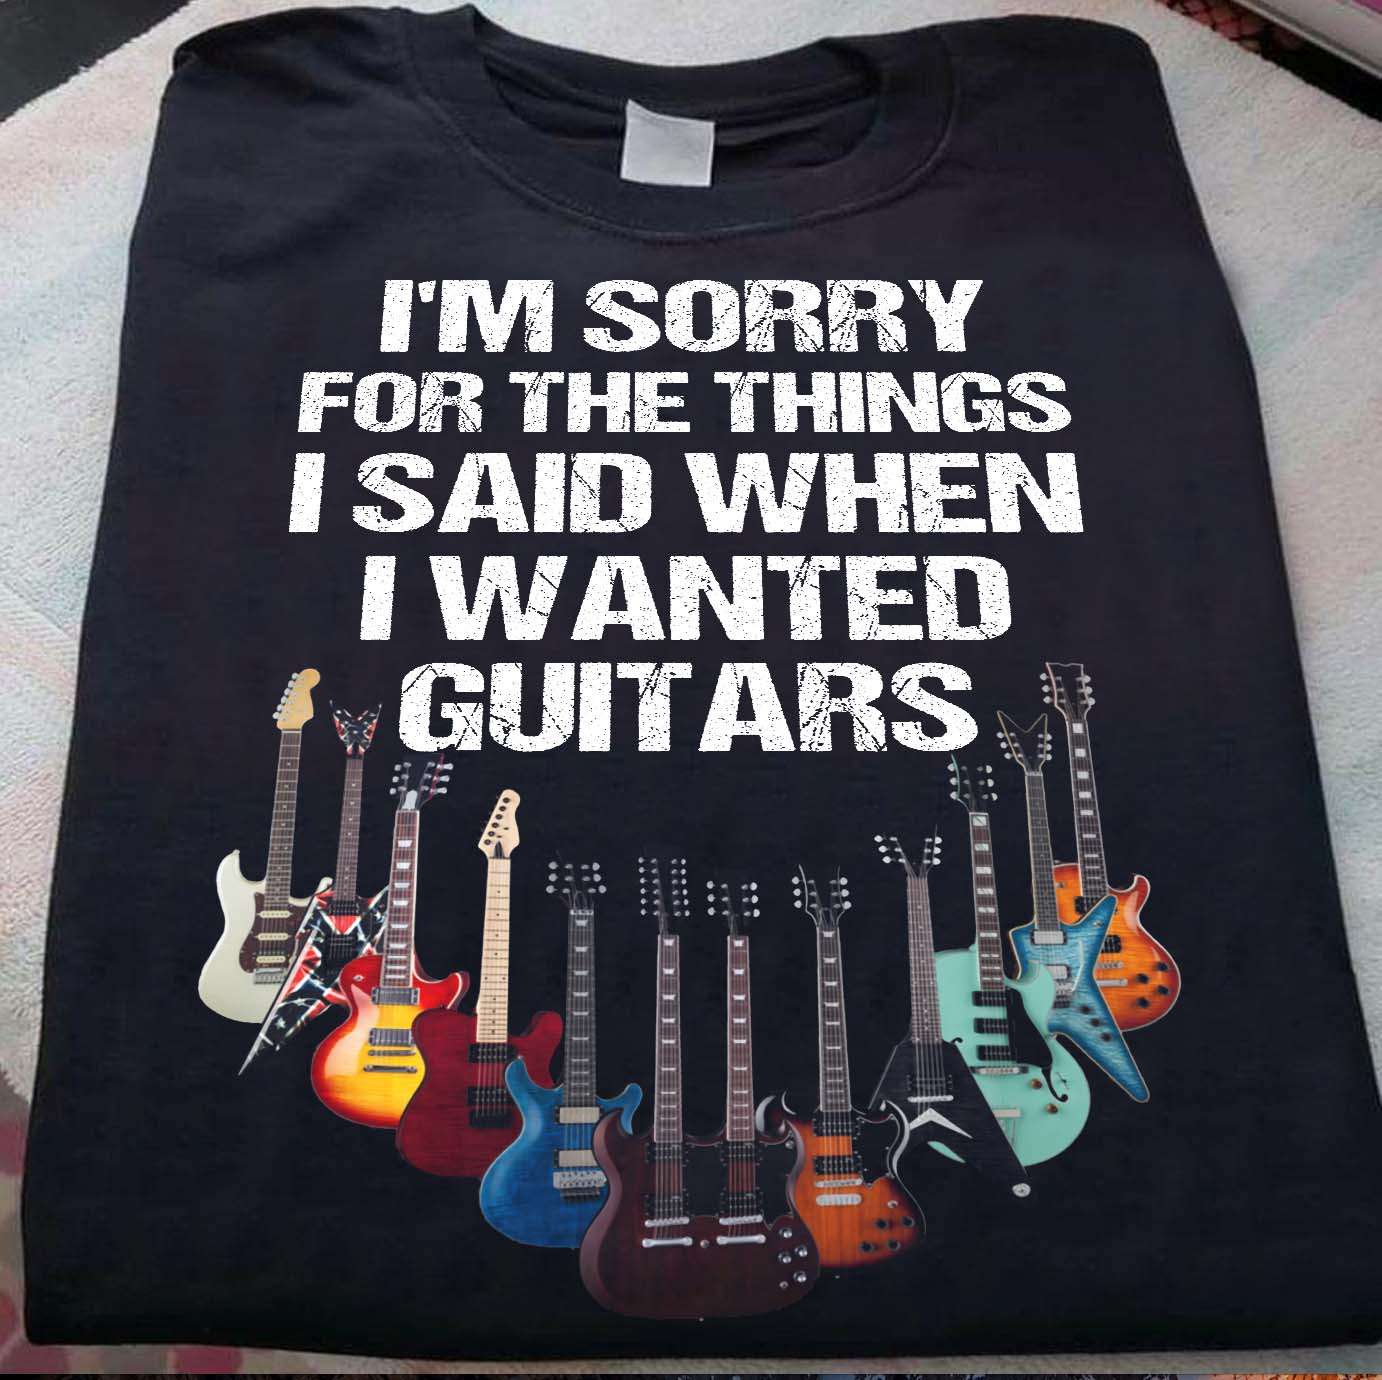 Im sorry for the things i said when i wanted guitars